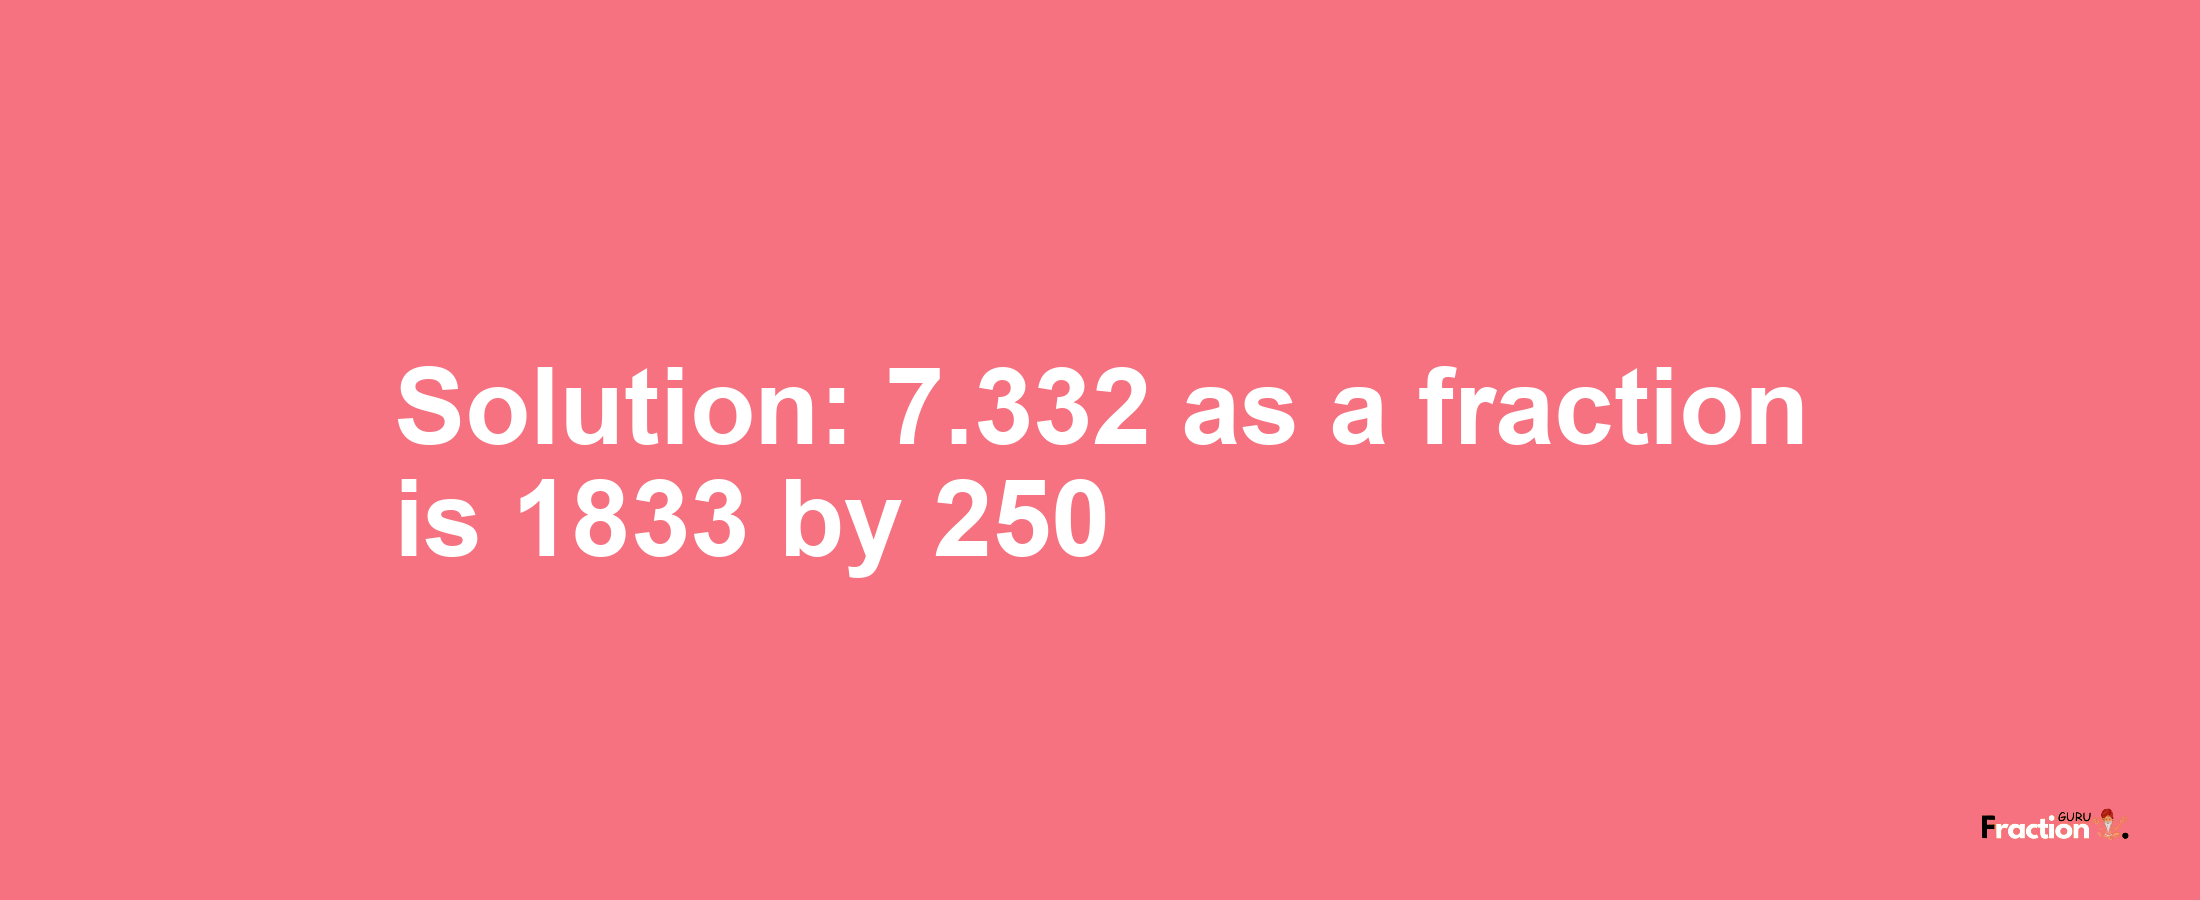 Solution:7.332 as a fraction is 1833/250